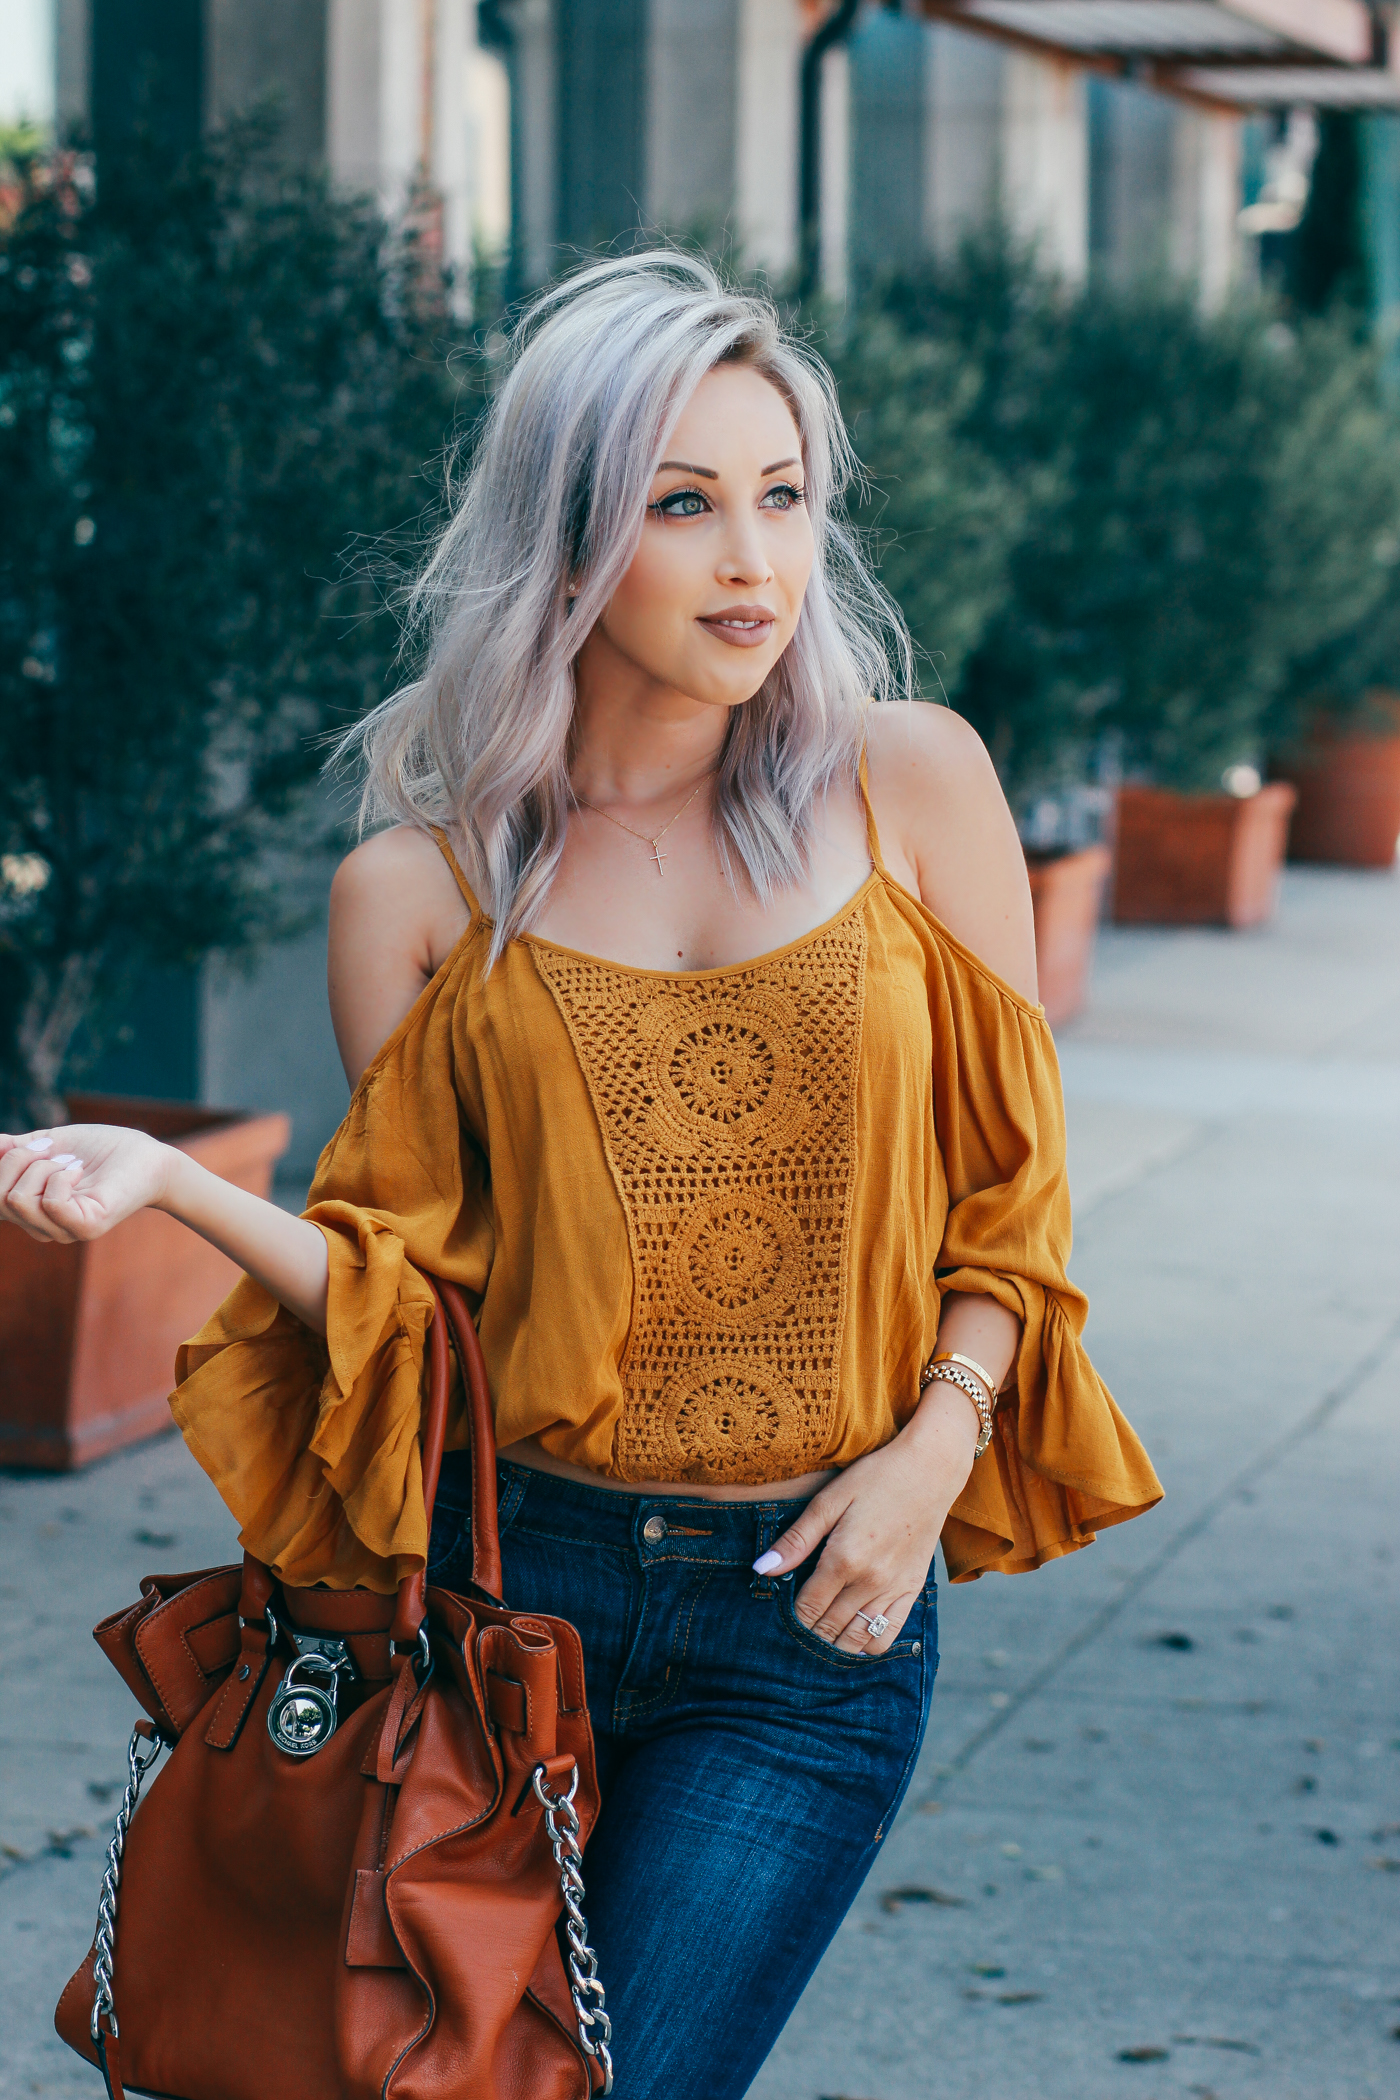 Blondie in the City | Off The Shoulder Top @Forever21 | Michael Kors Bag | Street Style | Outfits For Fall | Fall Wardrobe